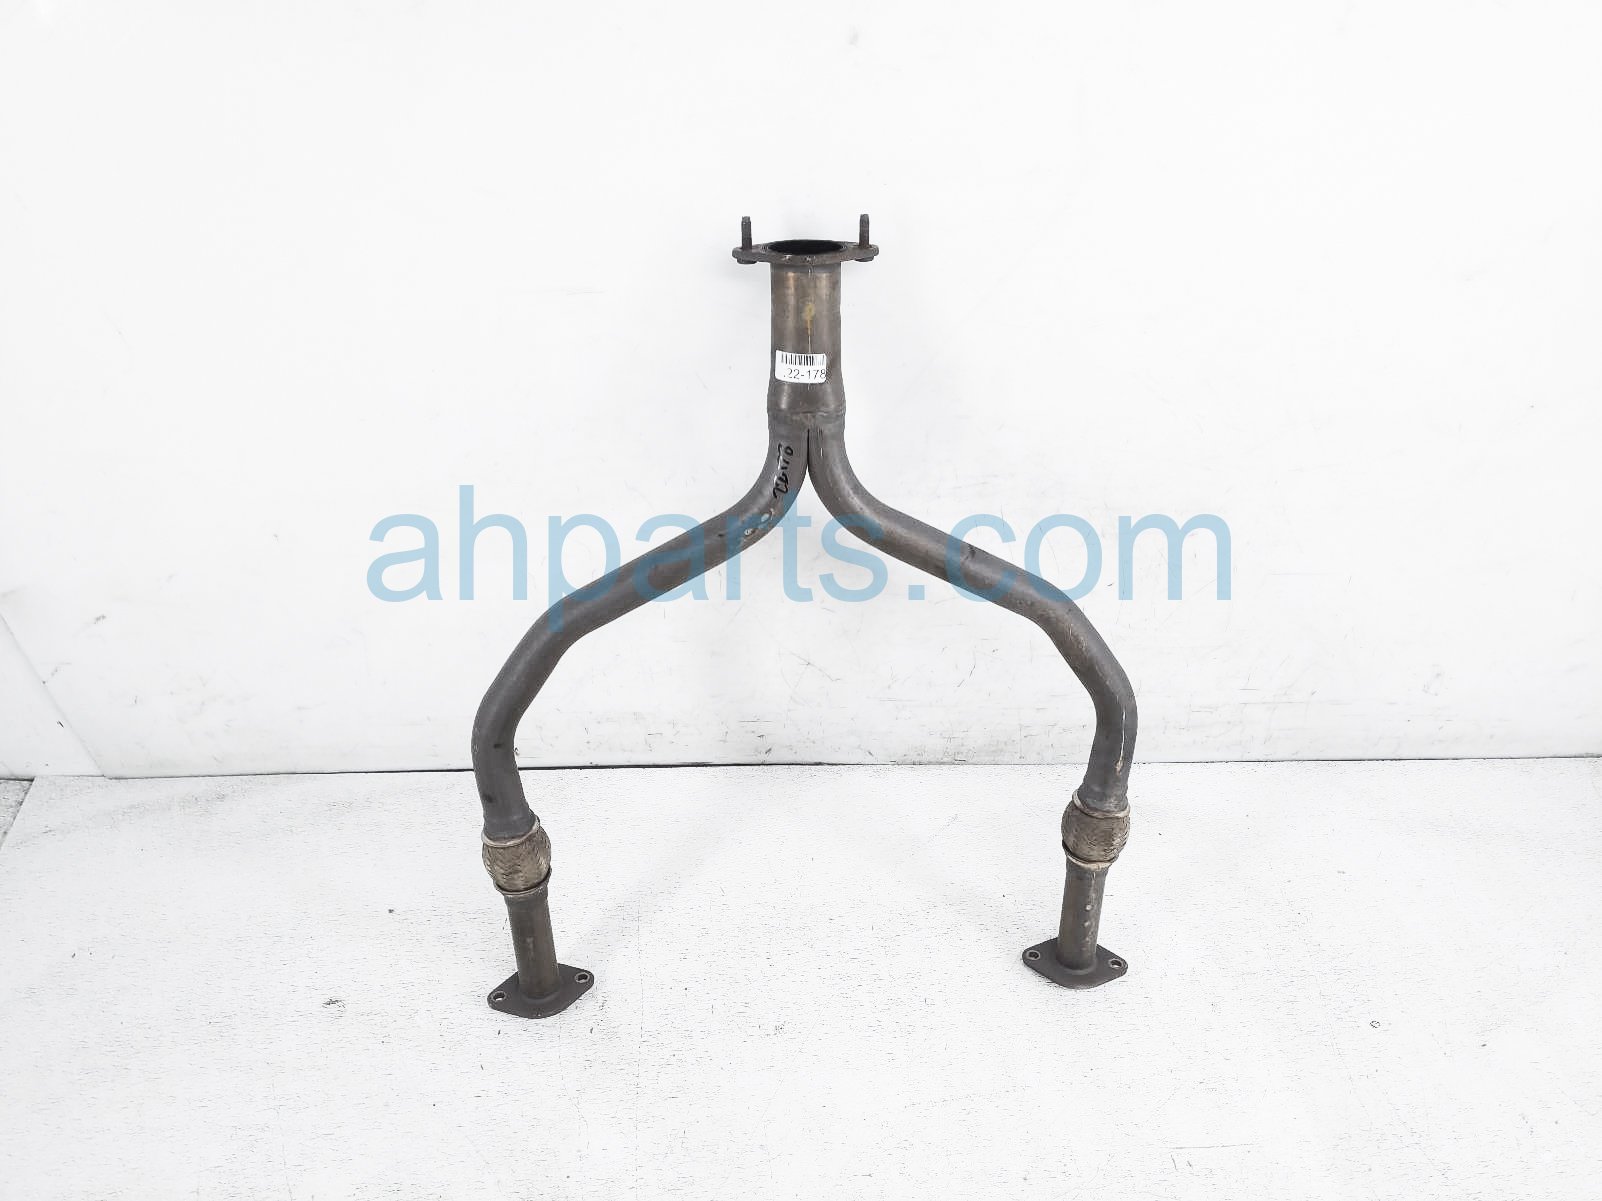 $95 Infiniti FRONT EXHAUST Y PIPE ASSY - 3.0L